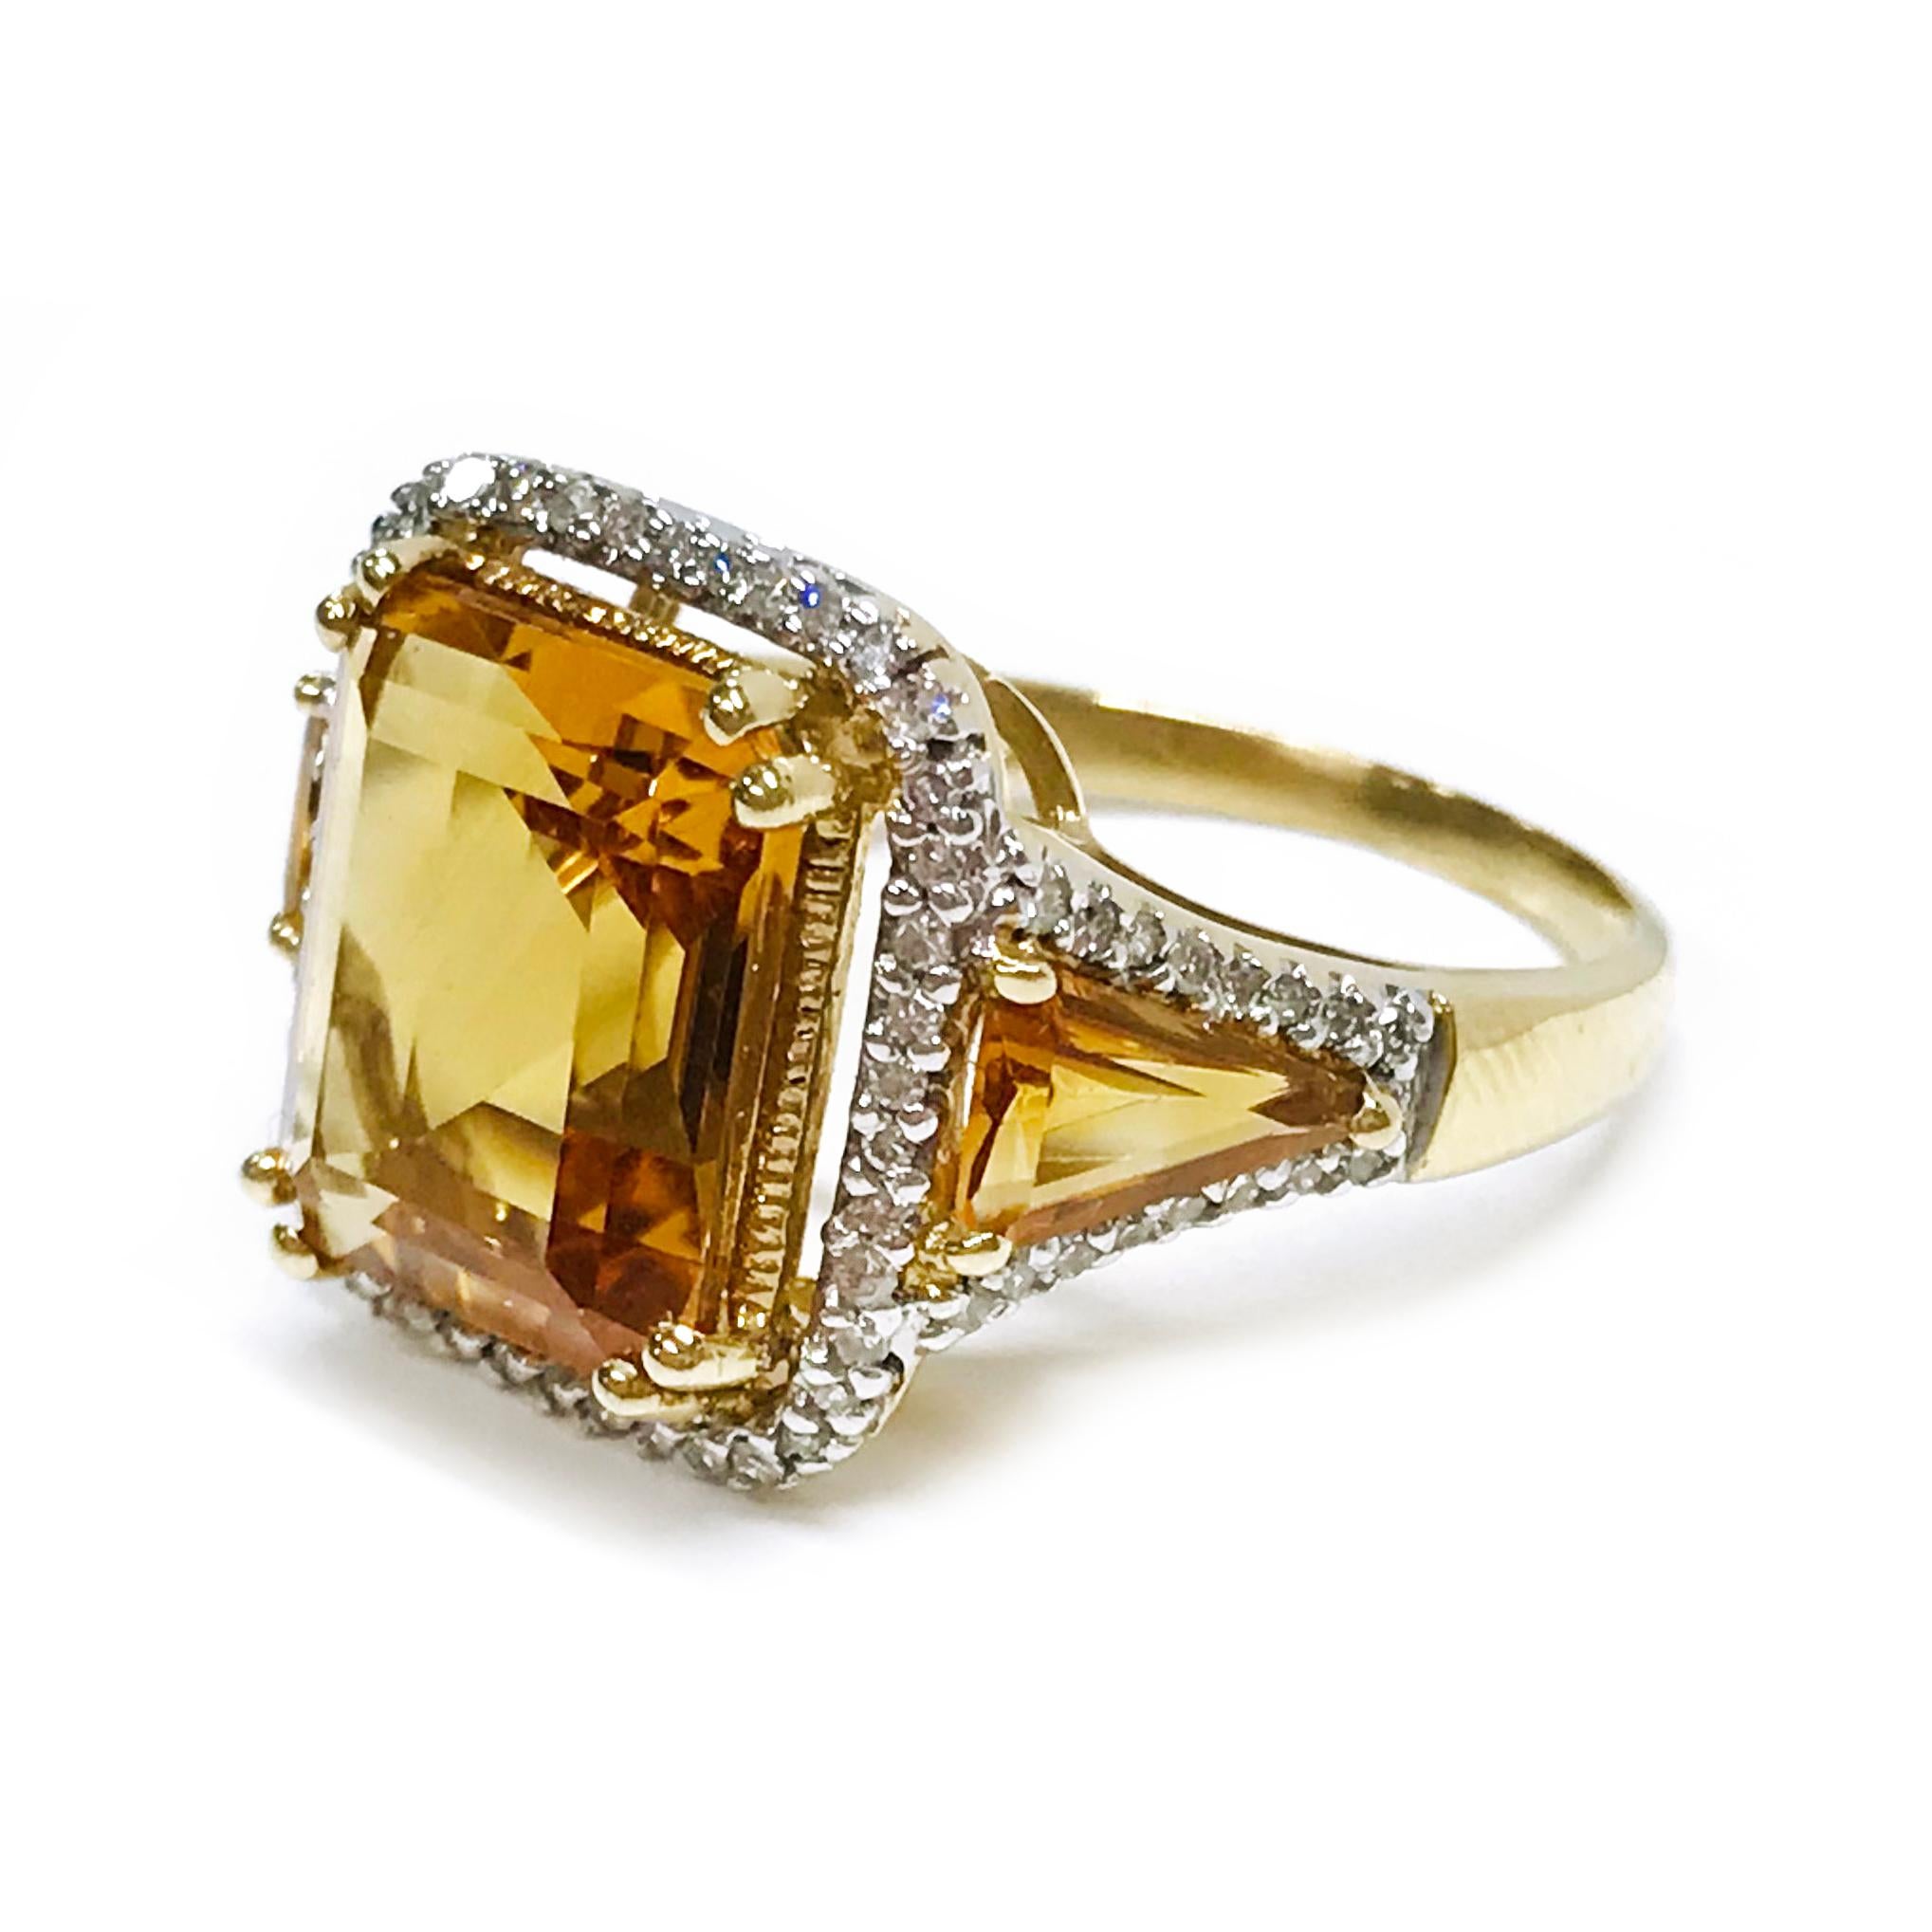 14 Karat Citrine Diamond Ring. The ring features a 12 x 10mm square prong-set step-cut golden color Citrine and two triangle baguette citrines with a halo of round diamonds in between and around all three Citrines. The diamonds have a total carat